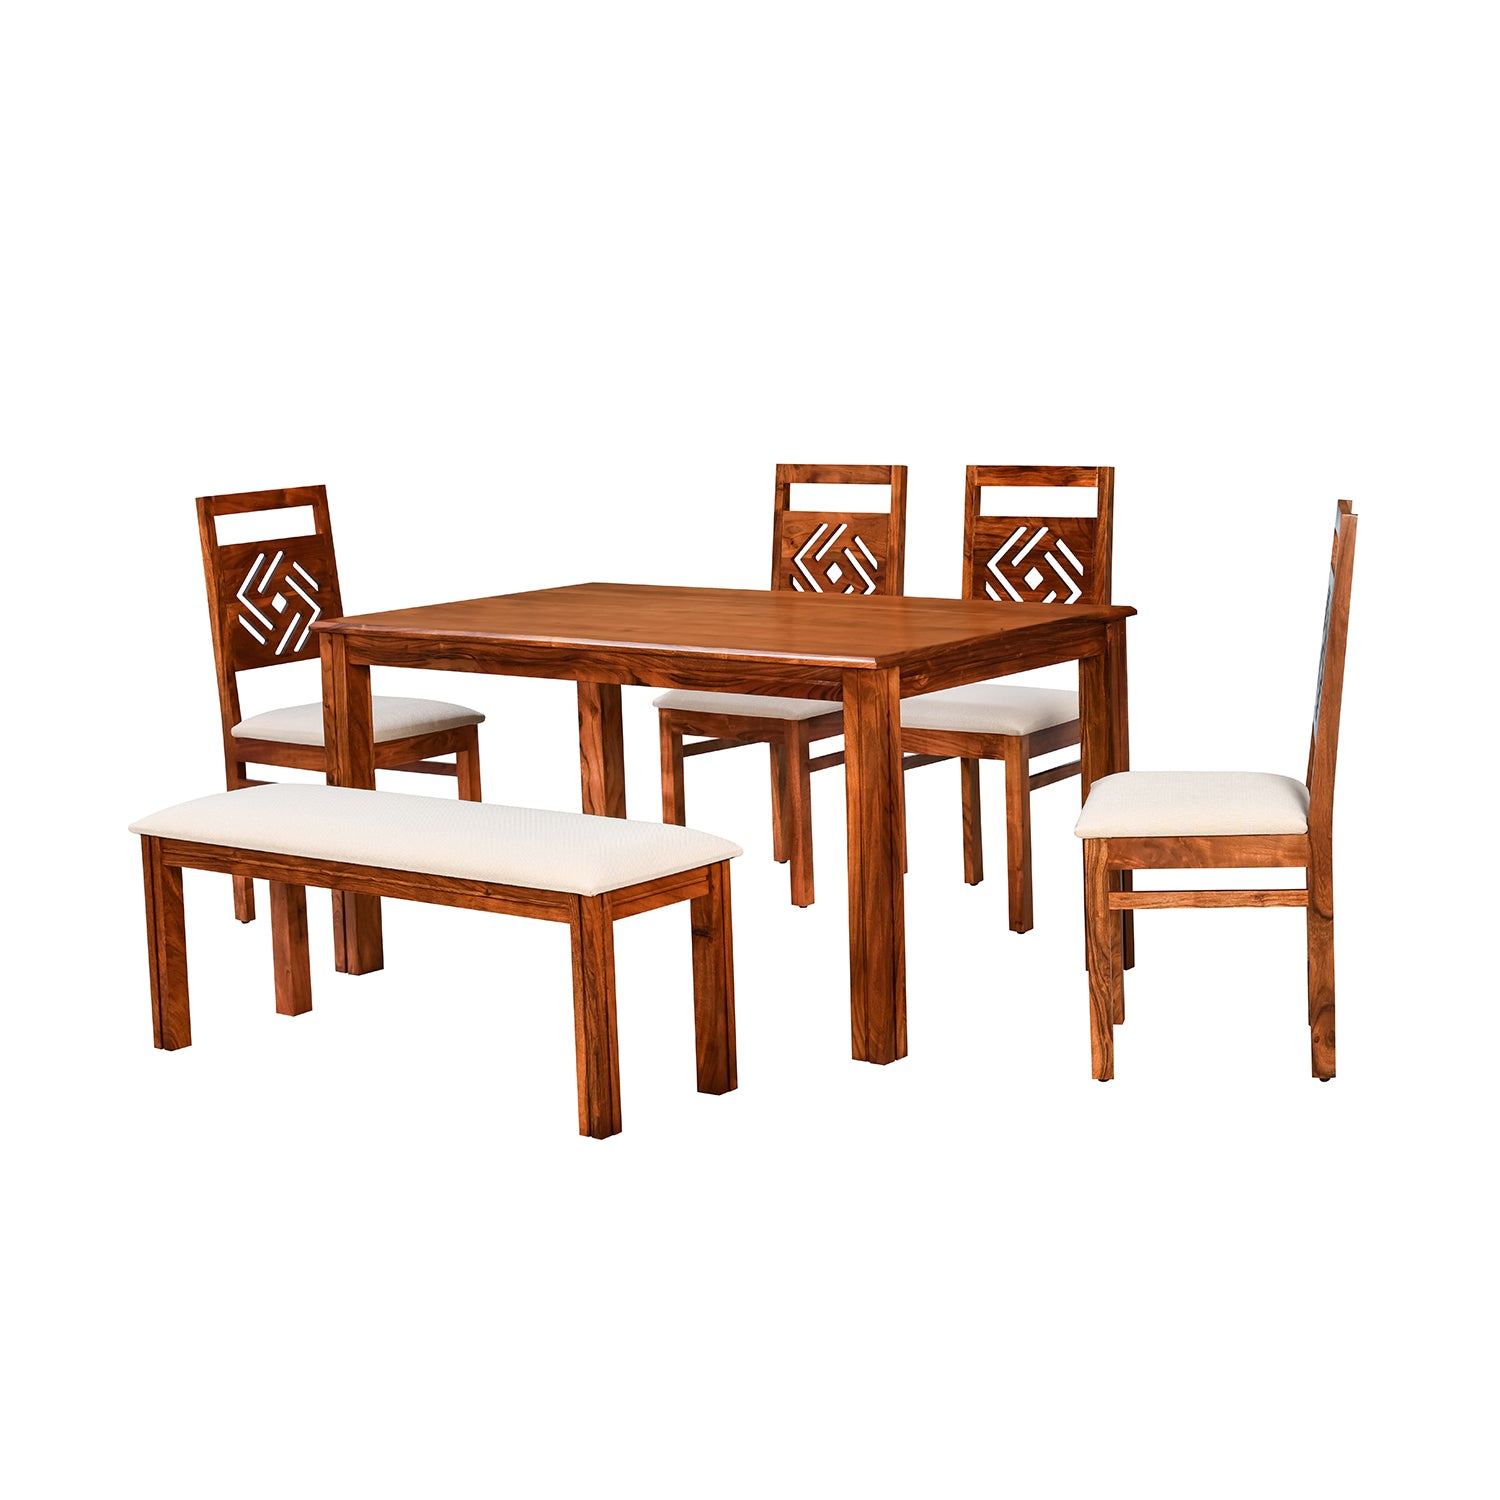 Cera 6 Seater Solid Wood Dining Set With Bench (Honey Brown)